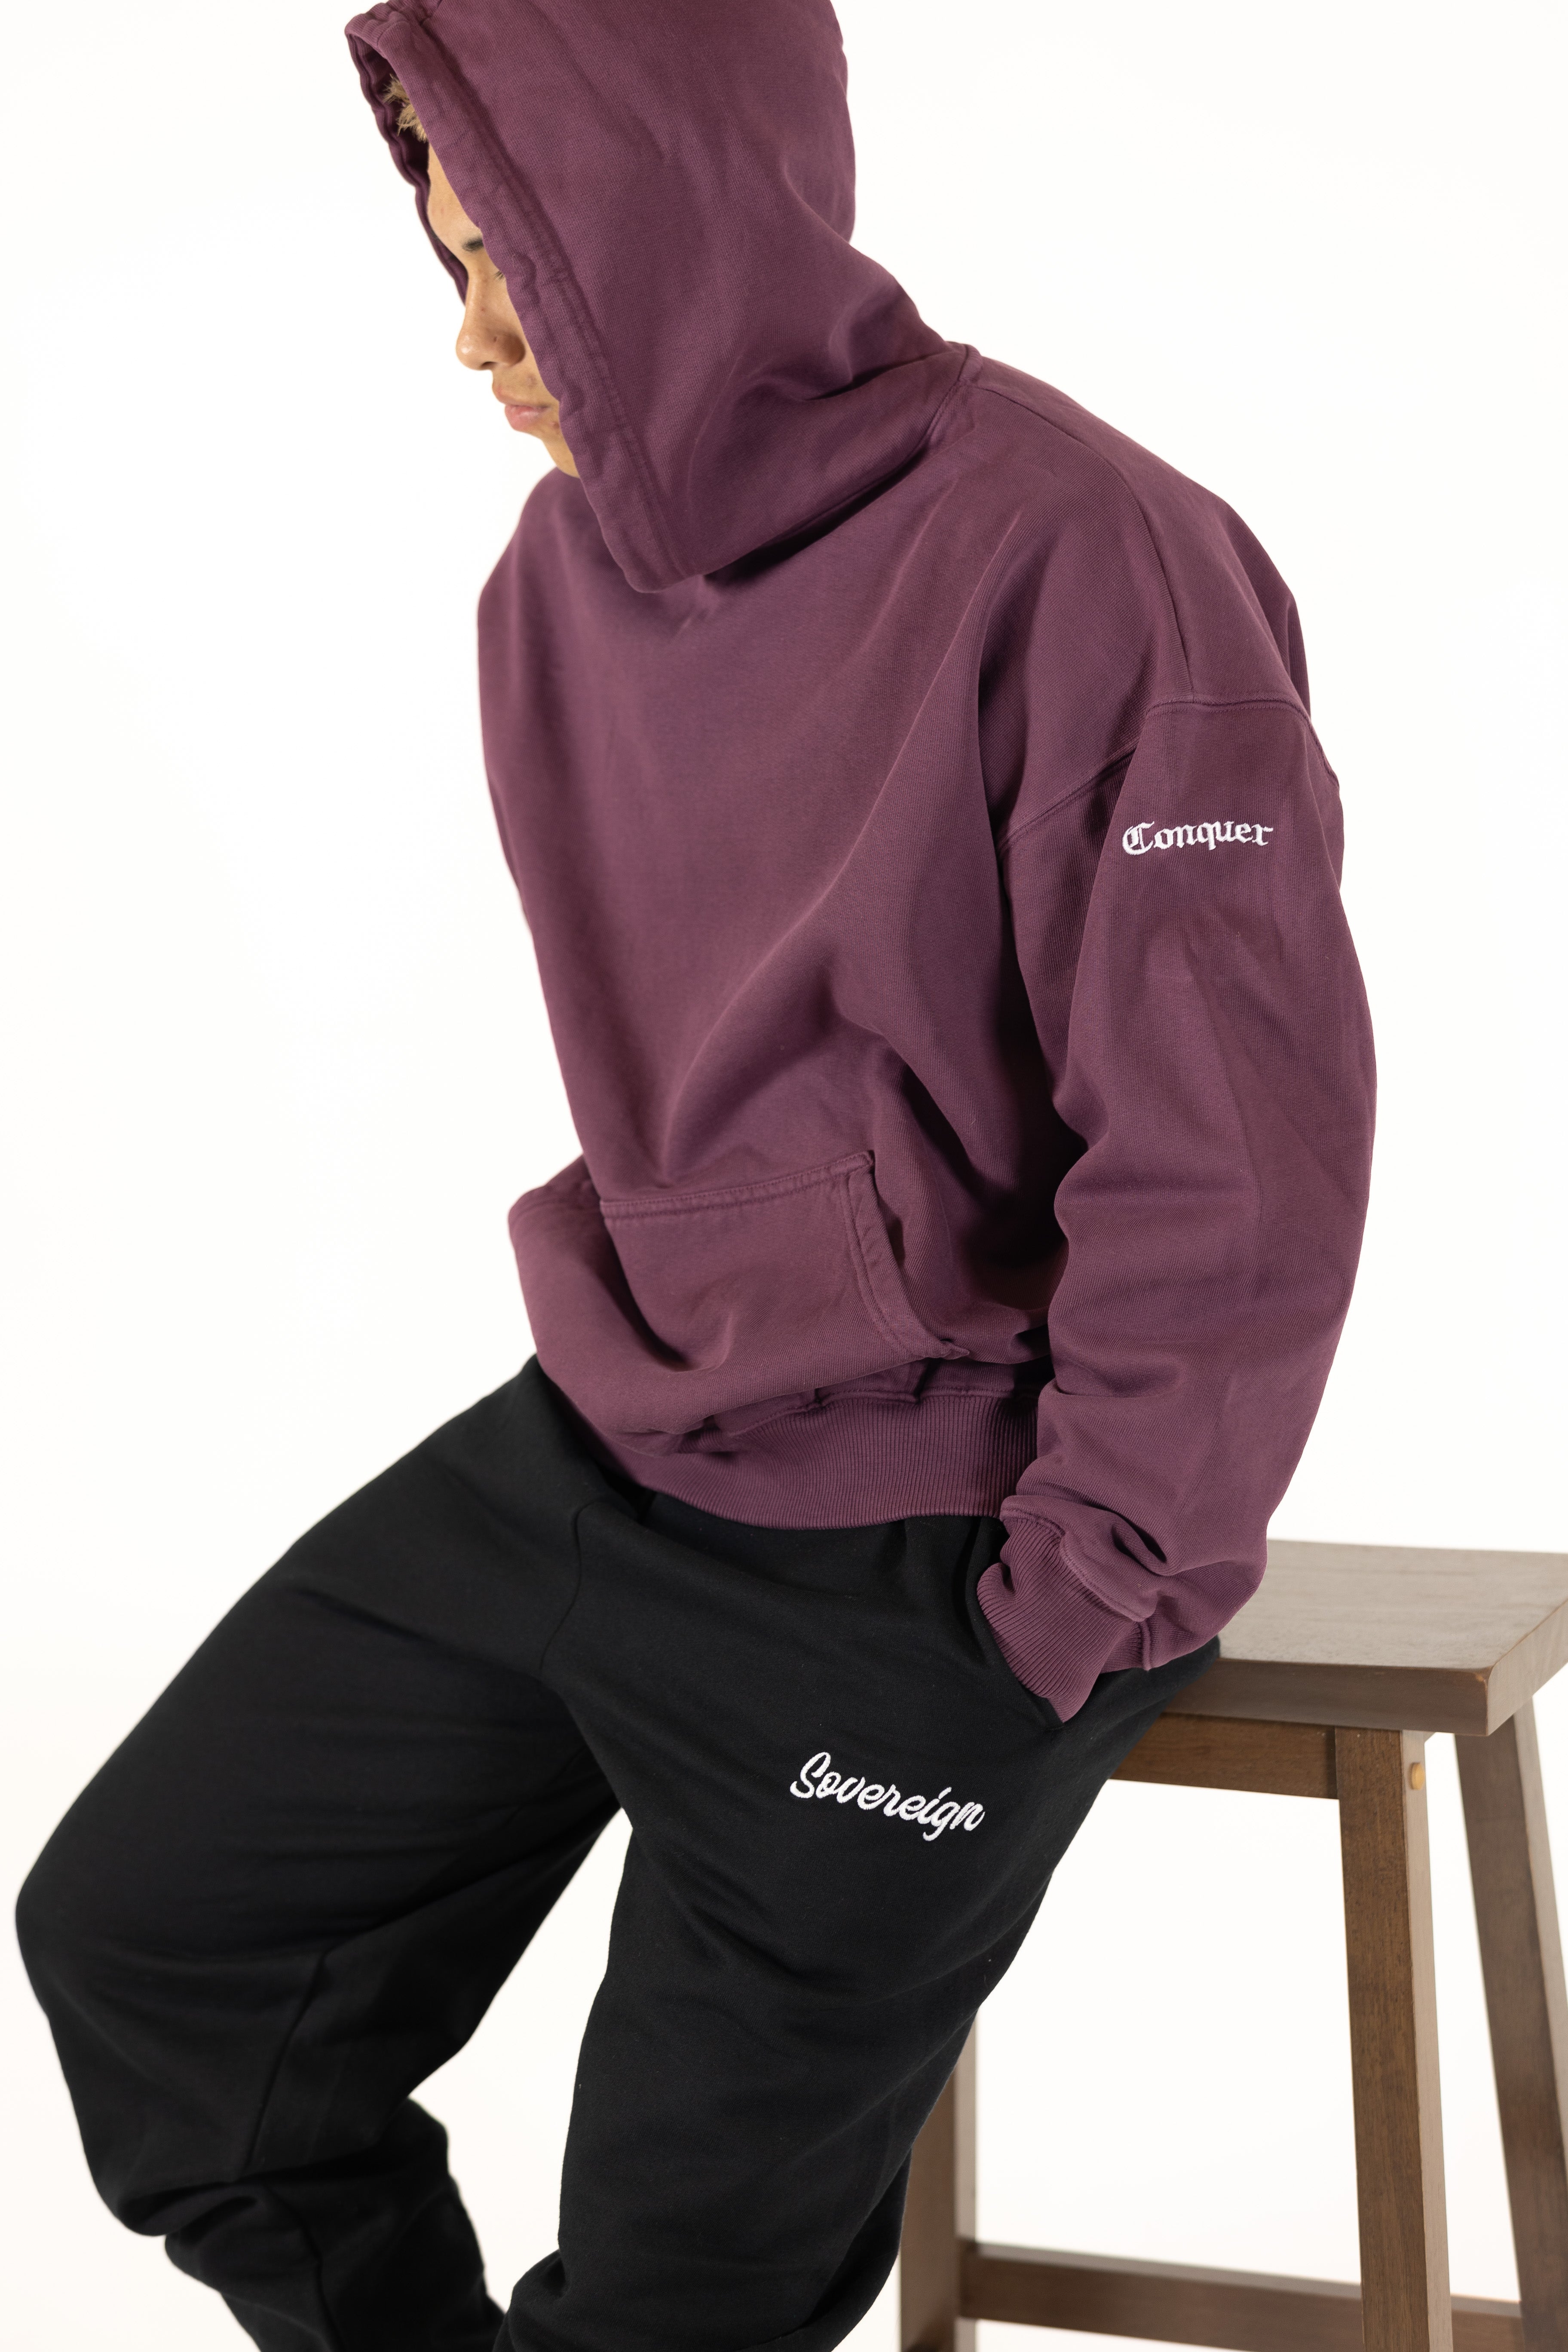 Sovereign Conquer Hoodie Blank BUrgundy oversized sustainable hoodie, photoshoot